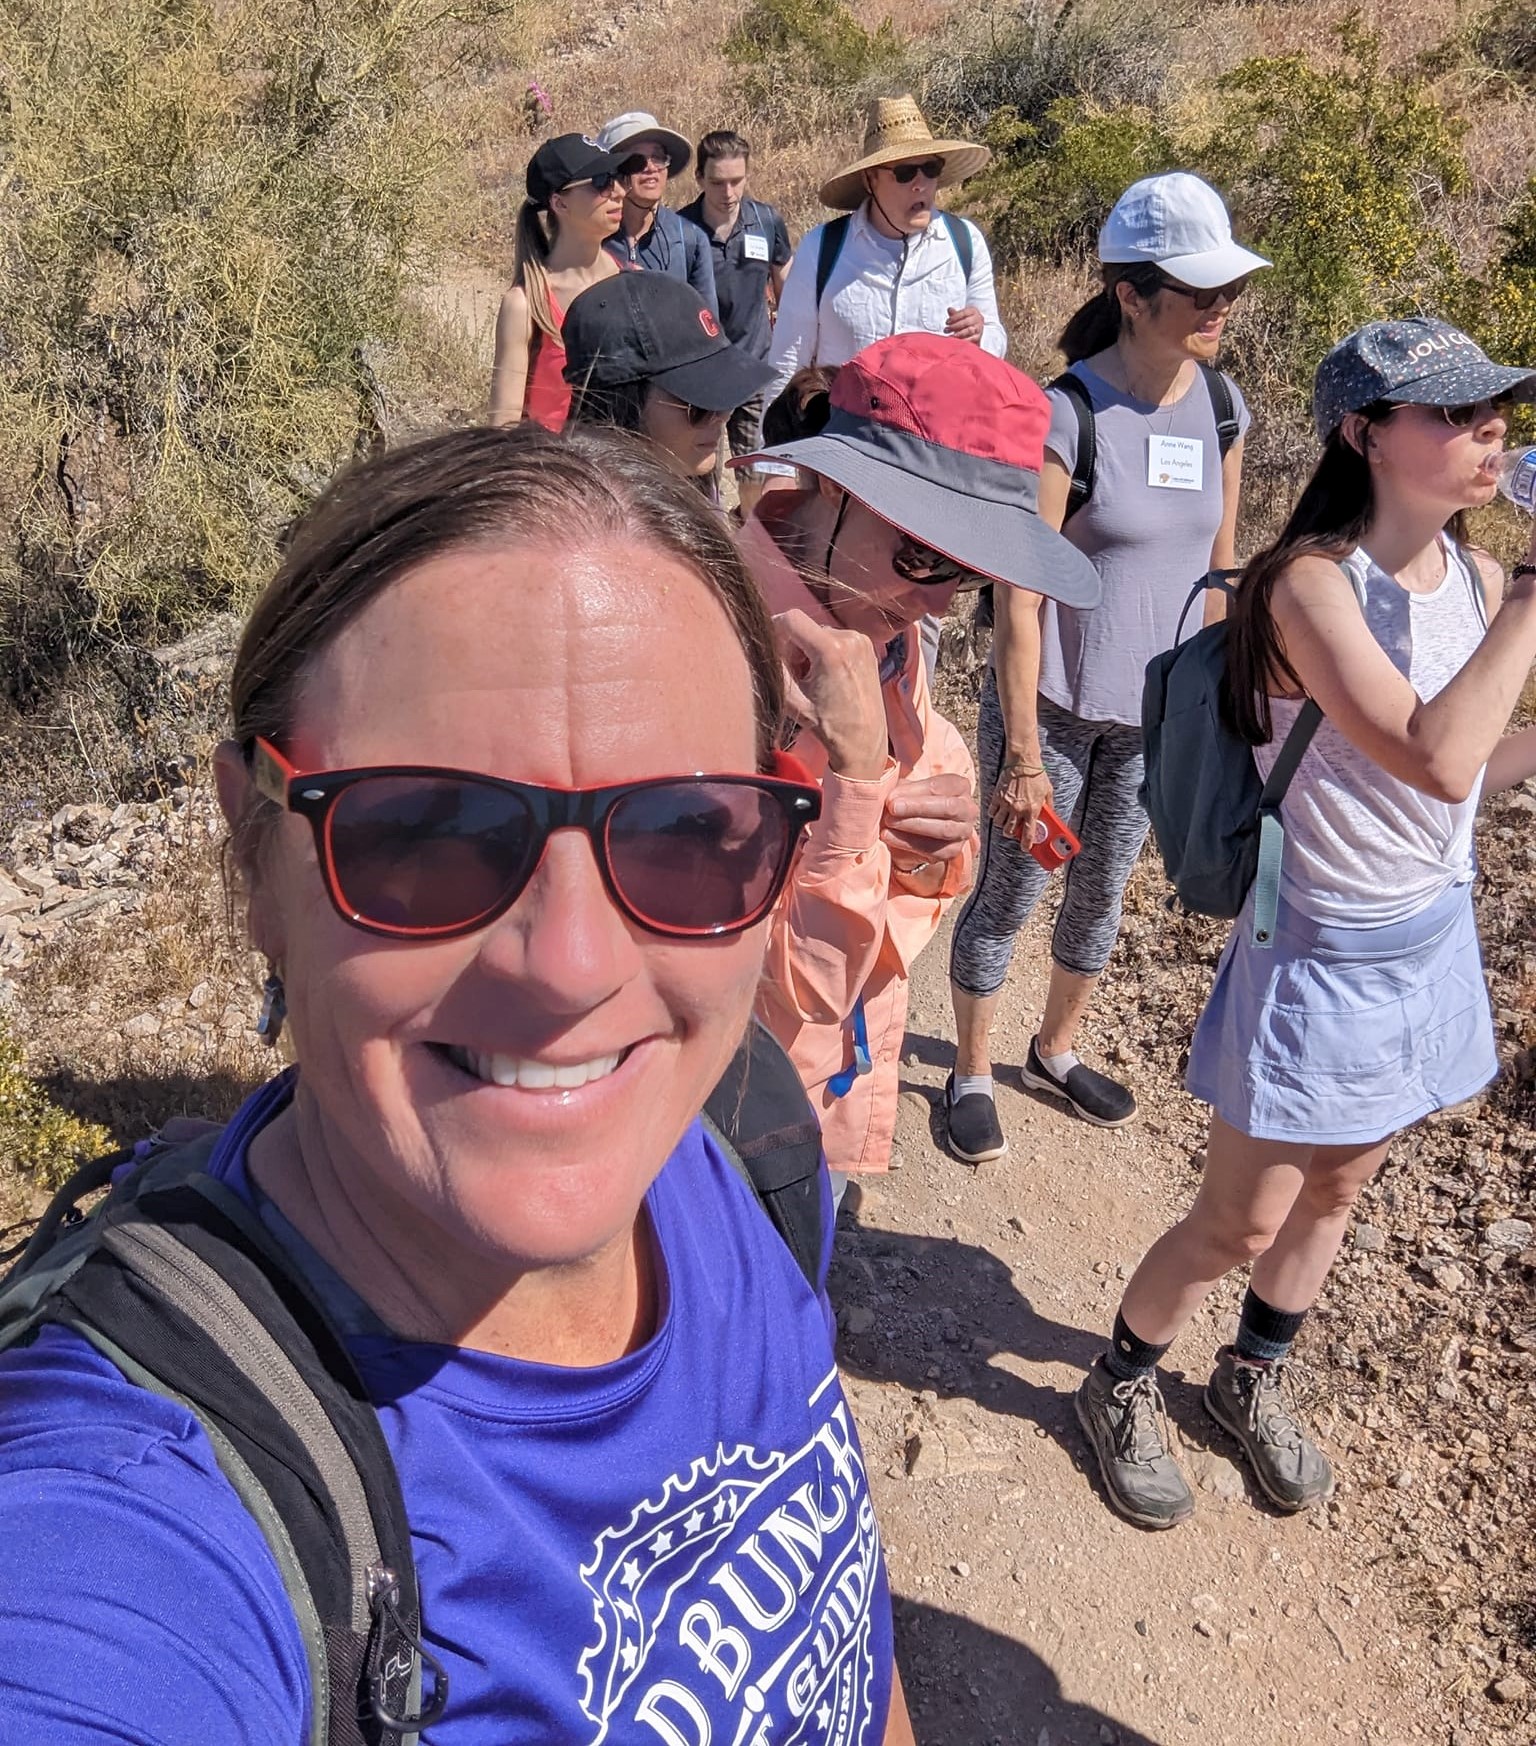 With guests in the background, Wild Bunch Desert Guides founder & owner Laurel Darren smiles proudly during another one of the successful Phoenix hiking tours from her boutique business.